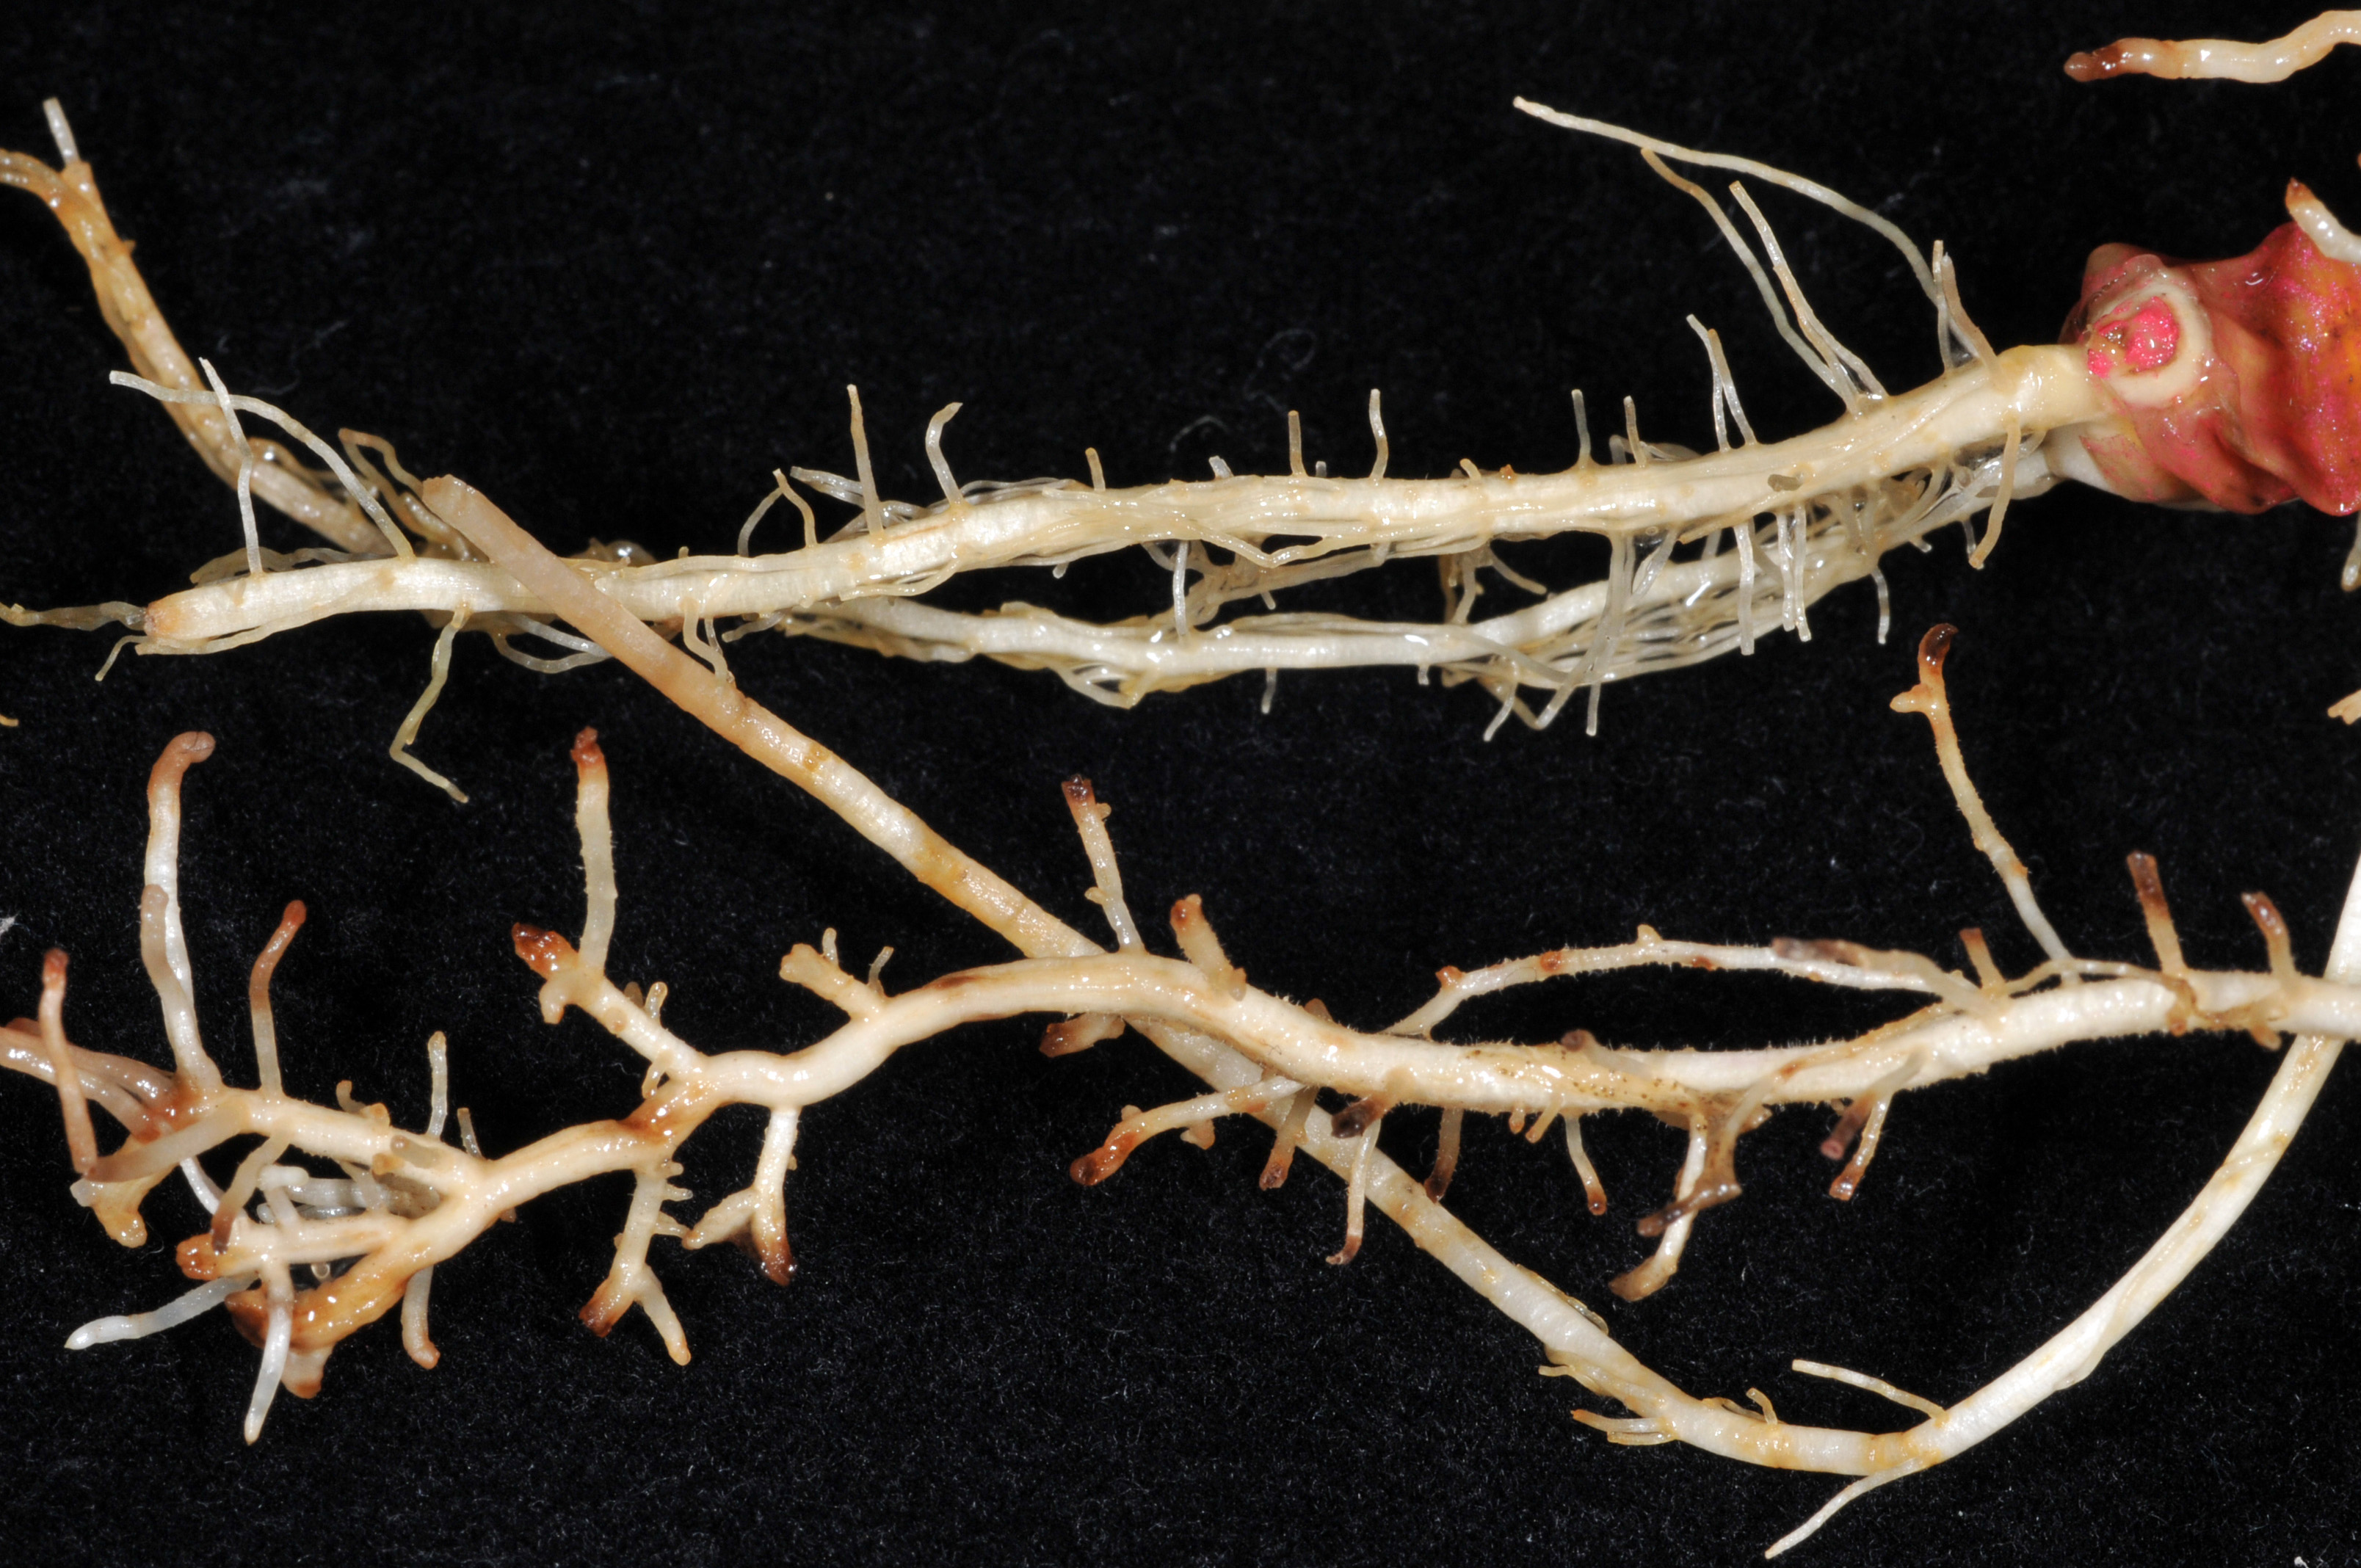 Close-up comparison of healthy (above) and needle nematode damaged (below) corn seedling roots.